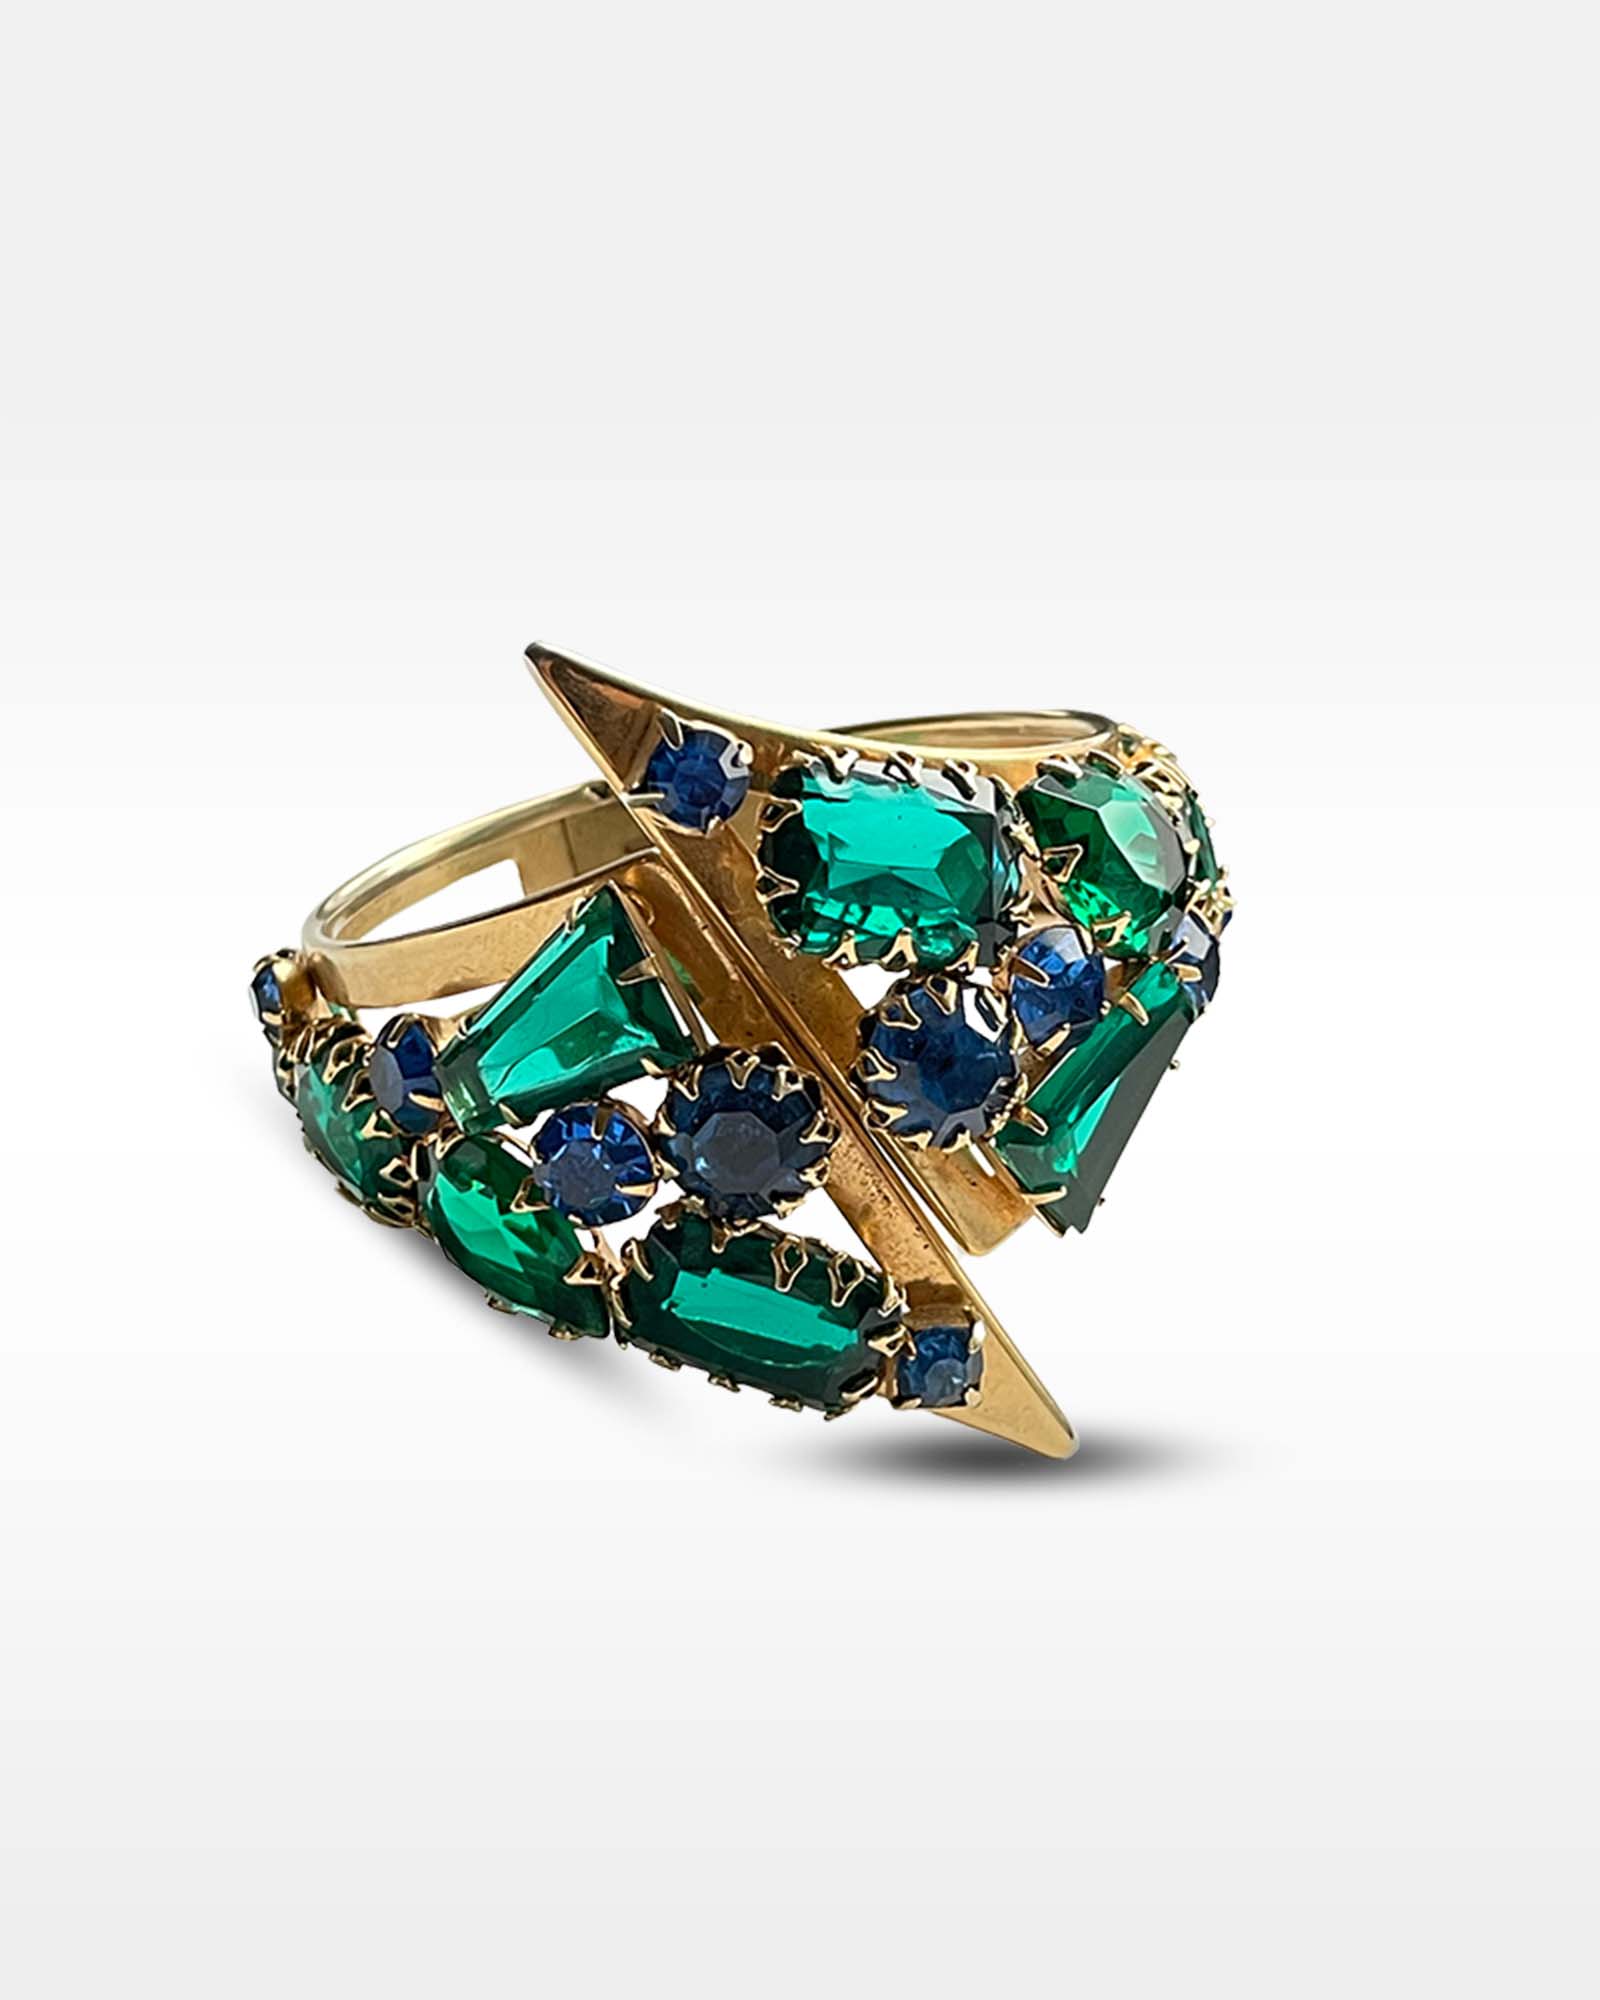 Gold Metal and Blue and Green Rhinestone Clamper Bracelet